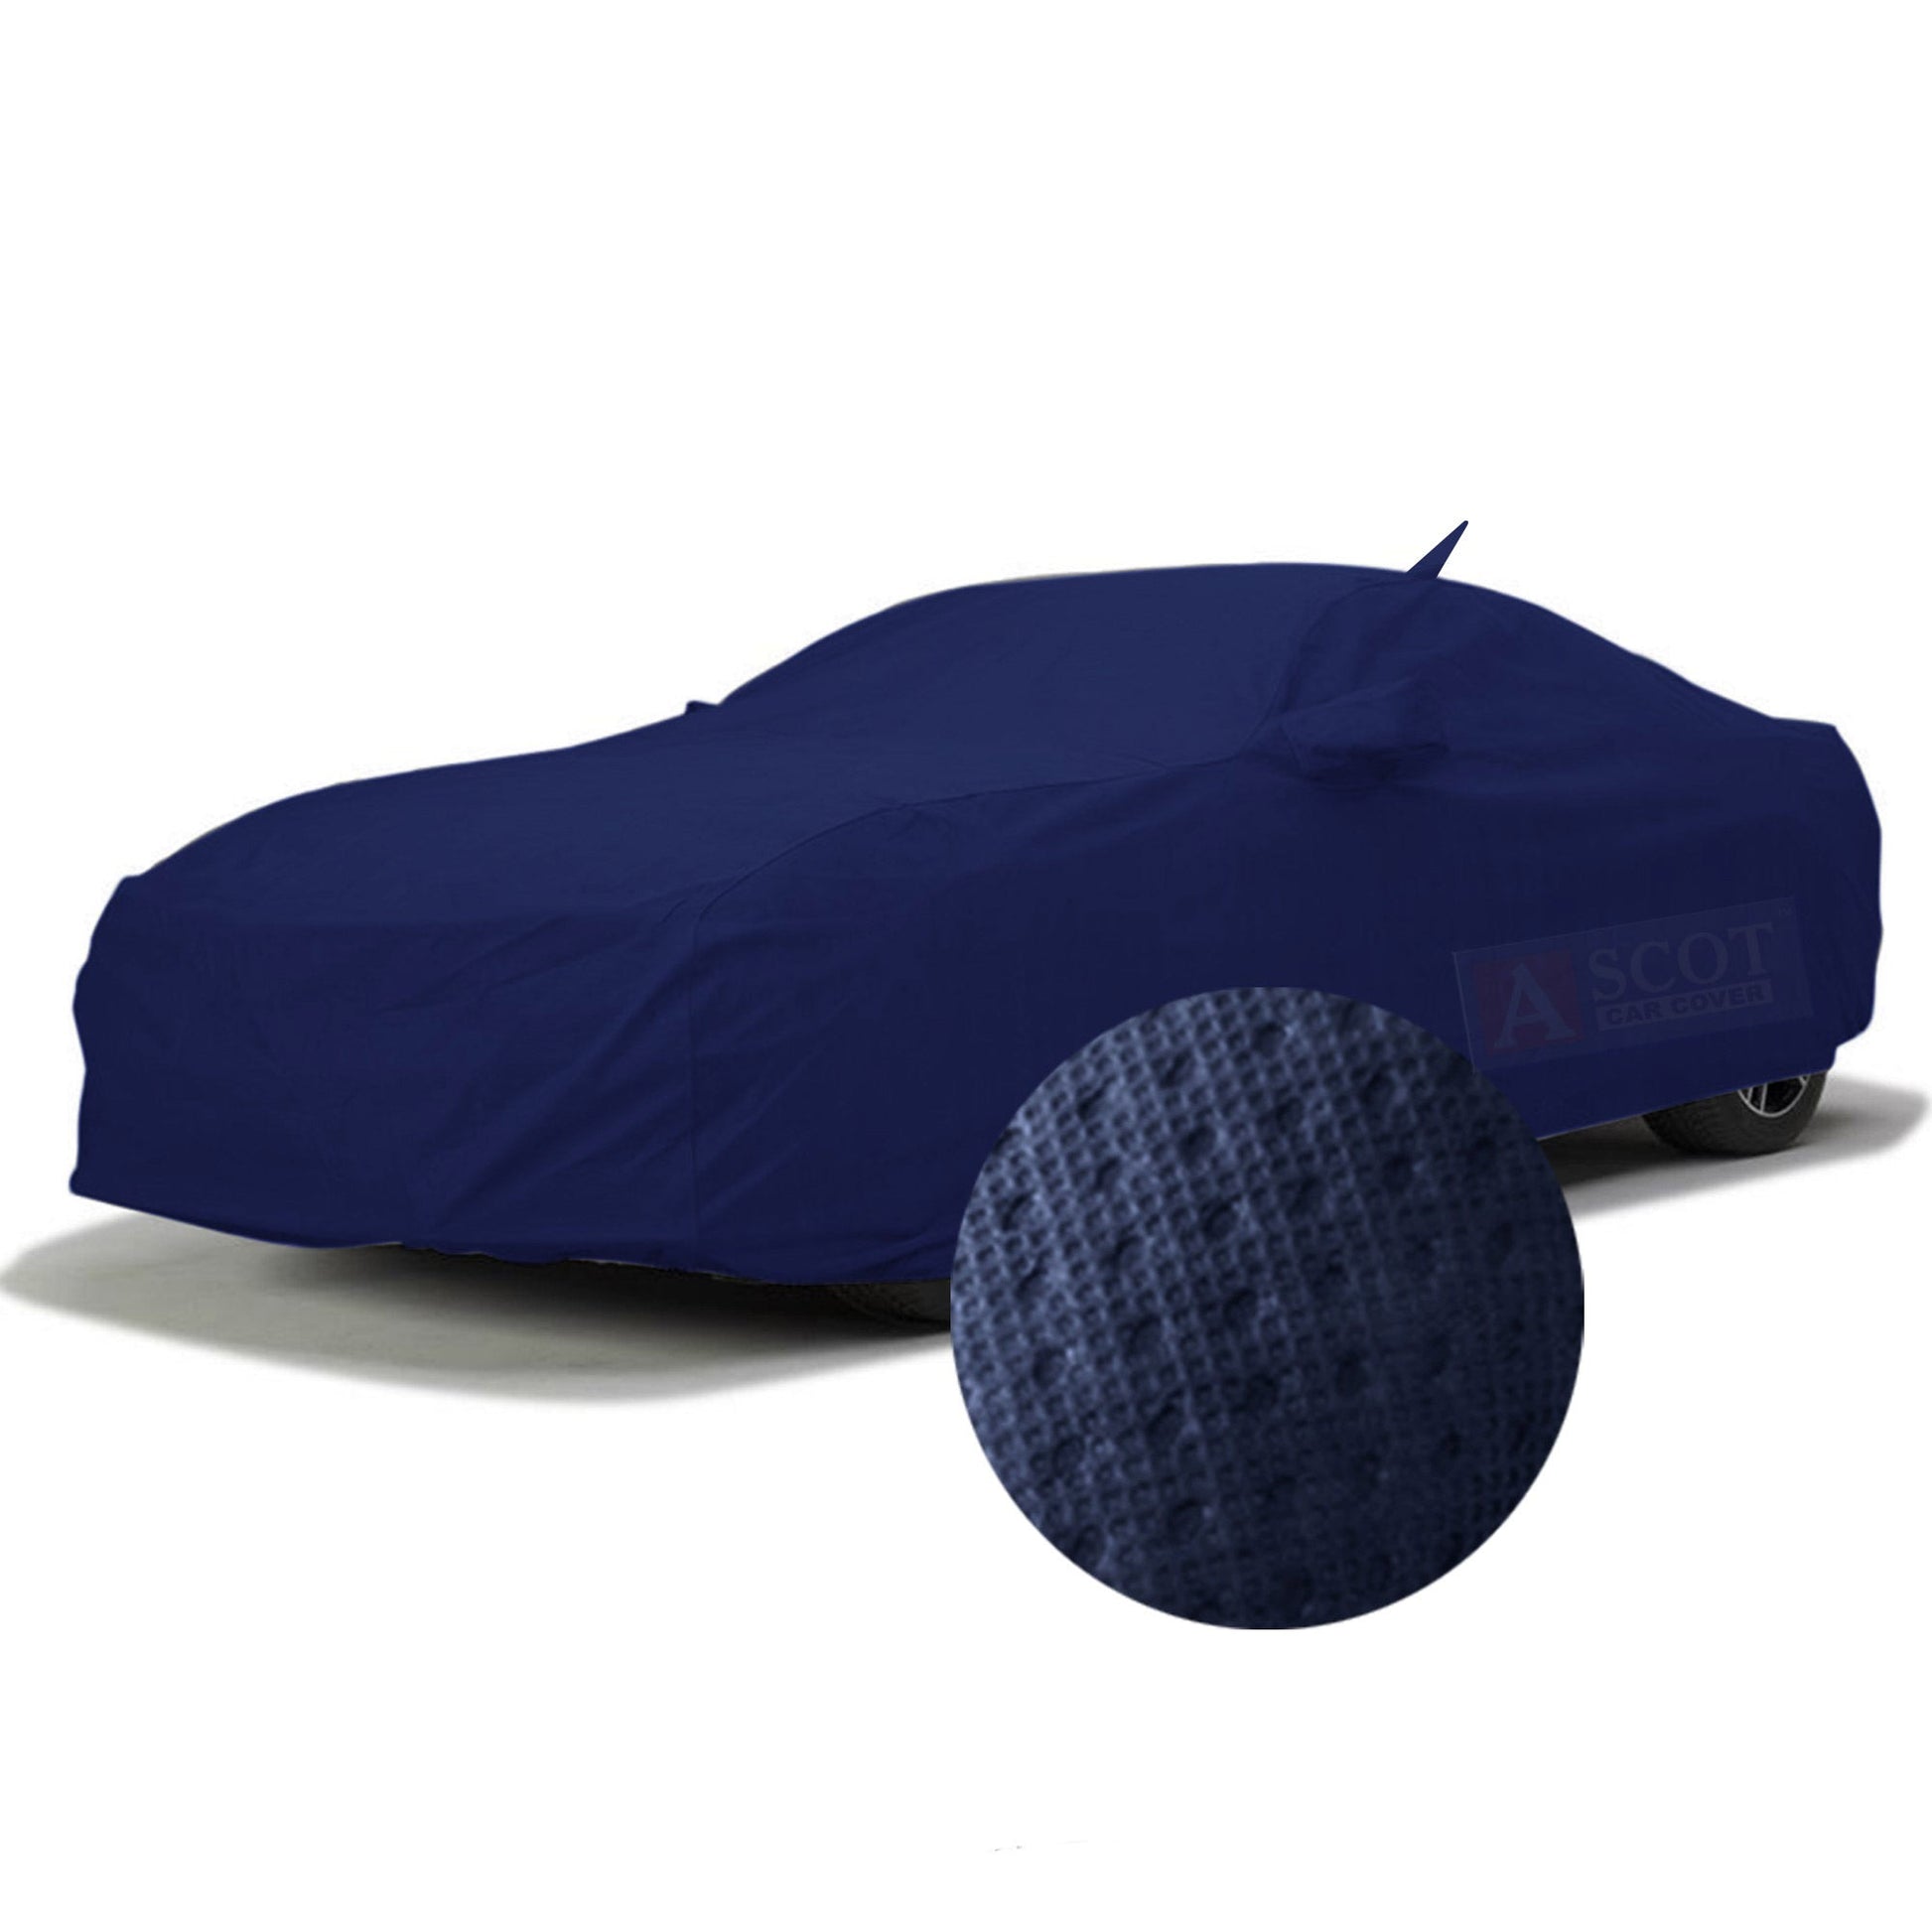 Outdoor car cover fits Jeep Renegade 100% waterproof now $ 225